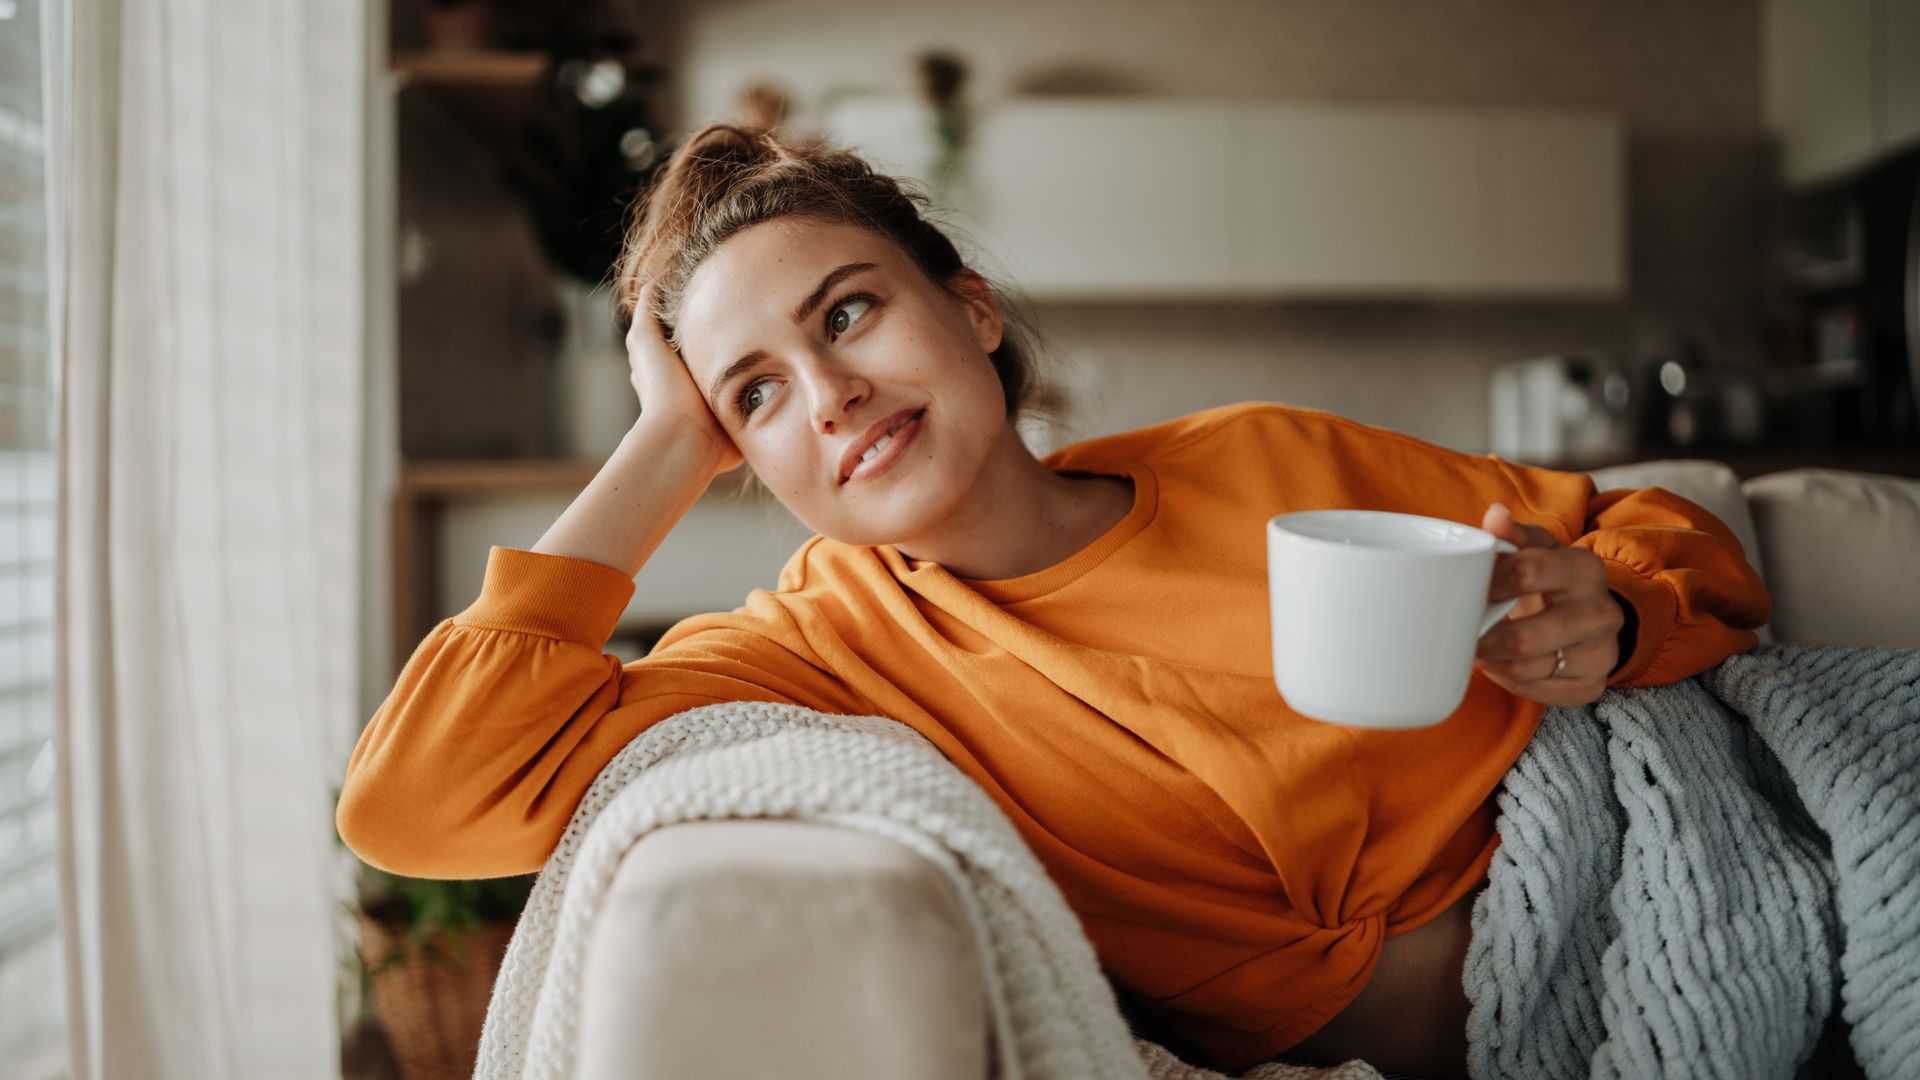 Young woman resting on sofa with cup of tea